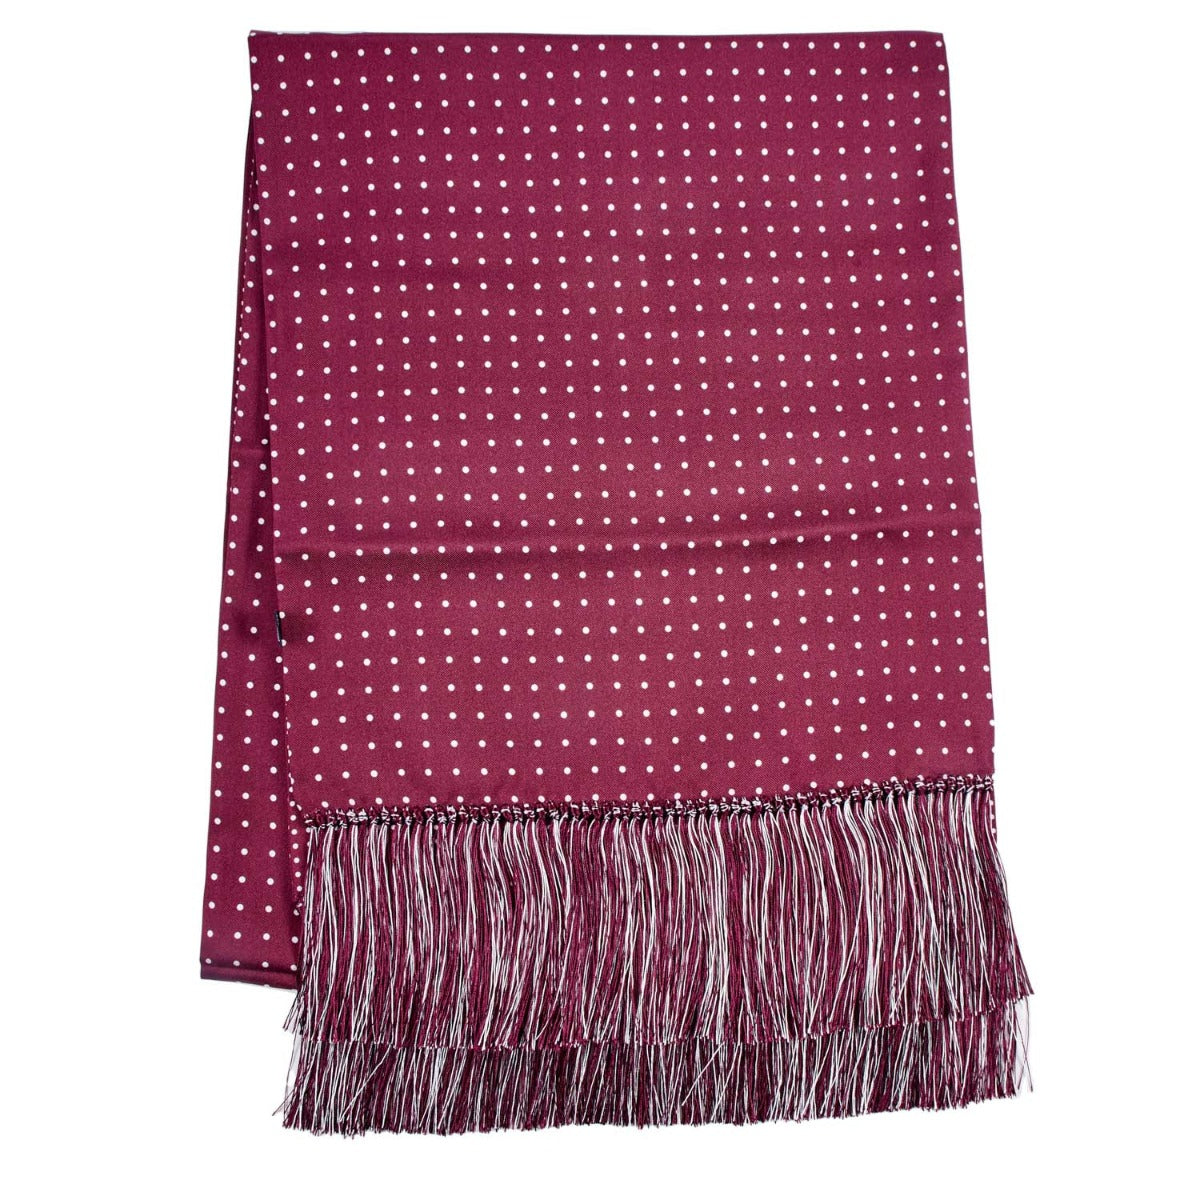 A Sovereign Grade Burgundy London Dot 36oz Reversible Printed Silk Scarf with fringes, perfect for winter, offered by KirbyAllison.com.